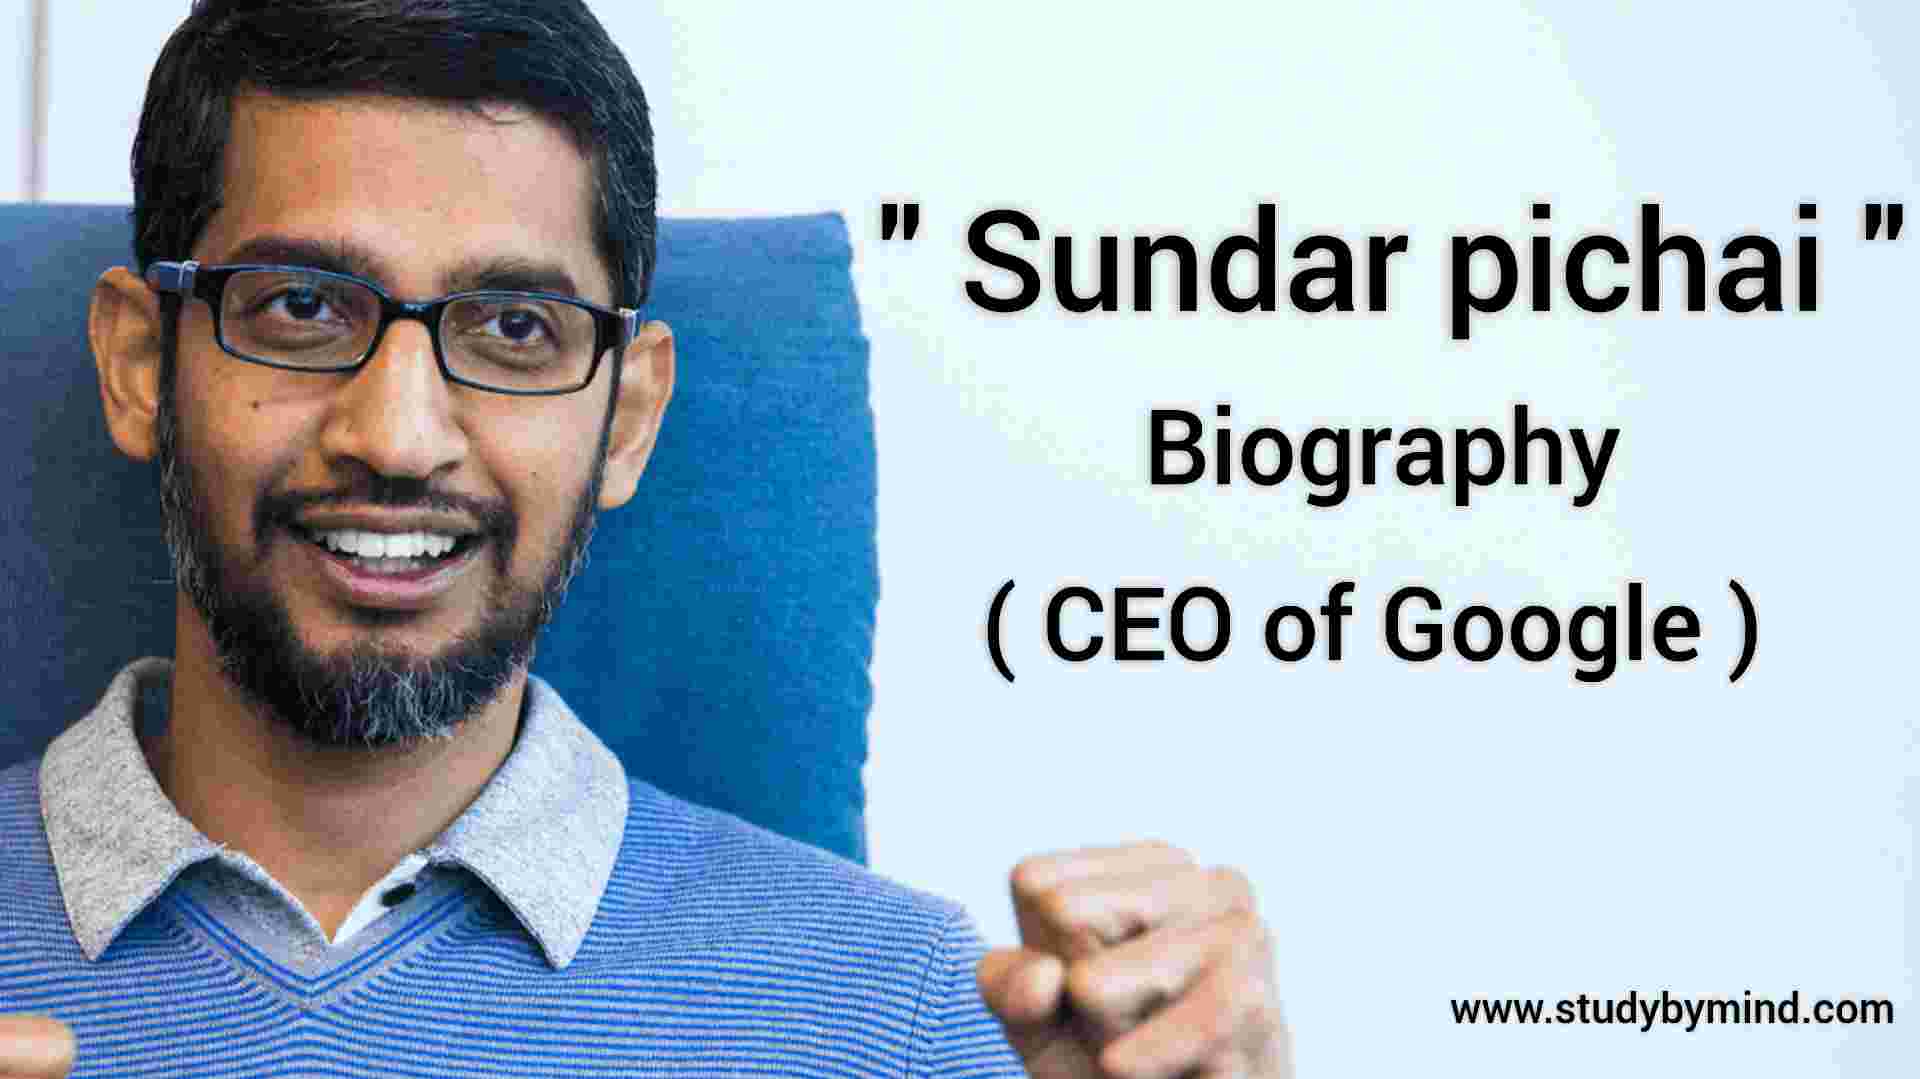 You are currently viewing Sundar pichai biography (CEO of google)